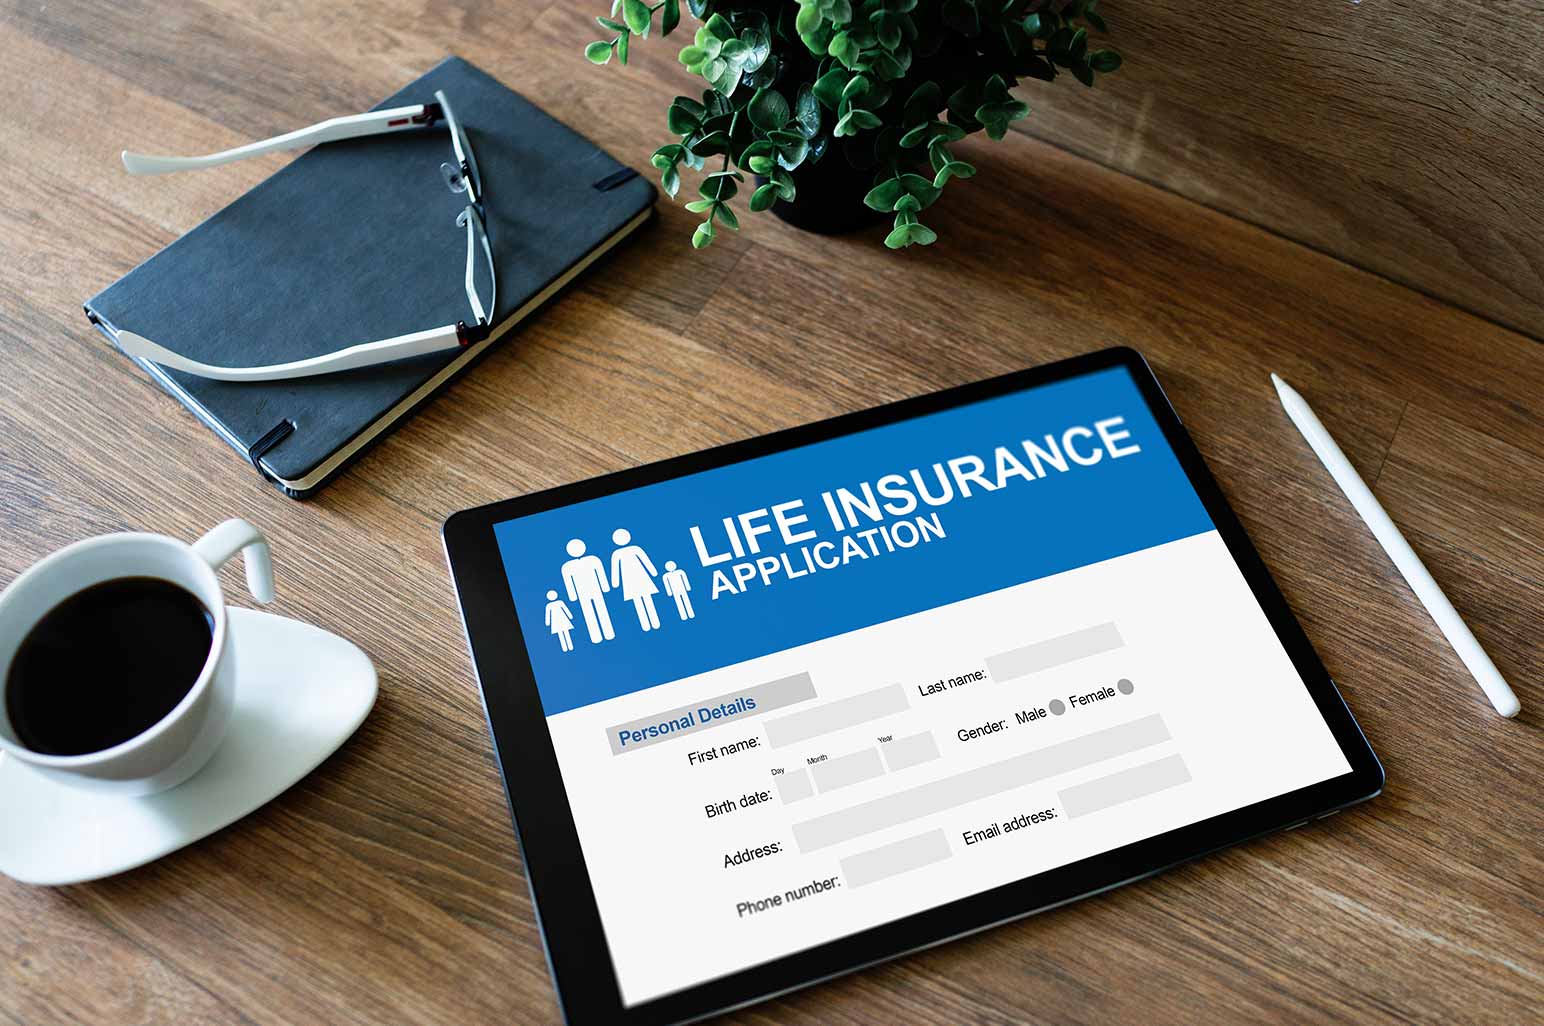 What Are The Basic Insurance Policies You Should Have